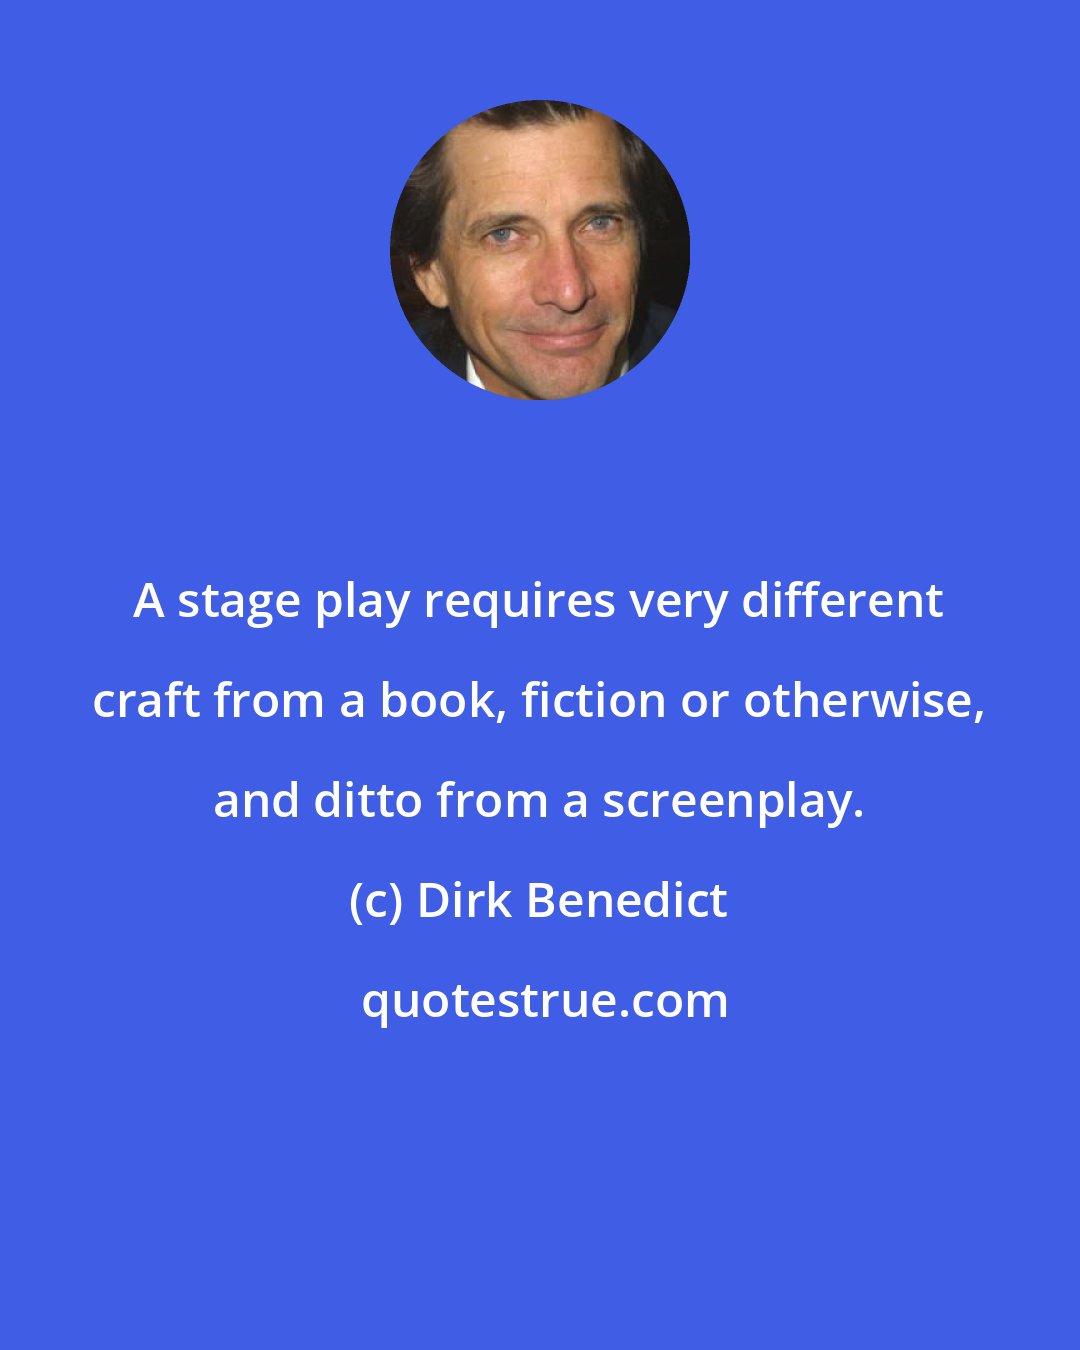 Dirk Benedict: A stage play requires very different craft from a book, fiction or otherwise, and ditto from a screenplay.